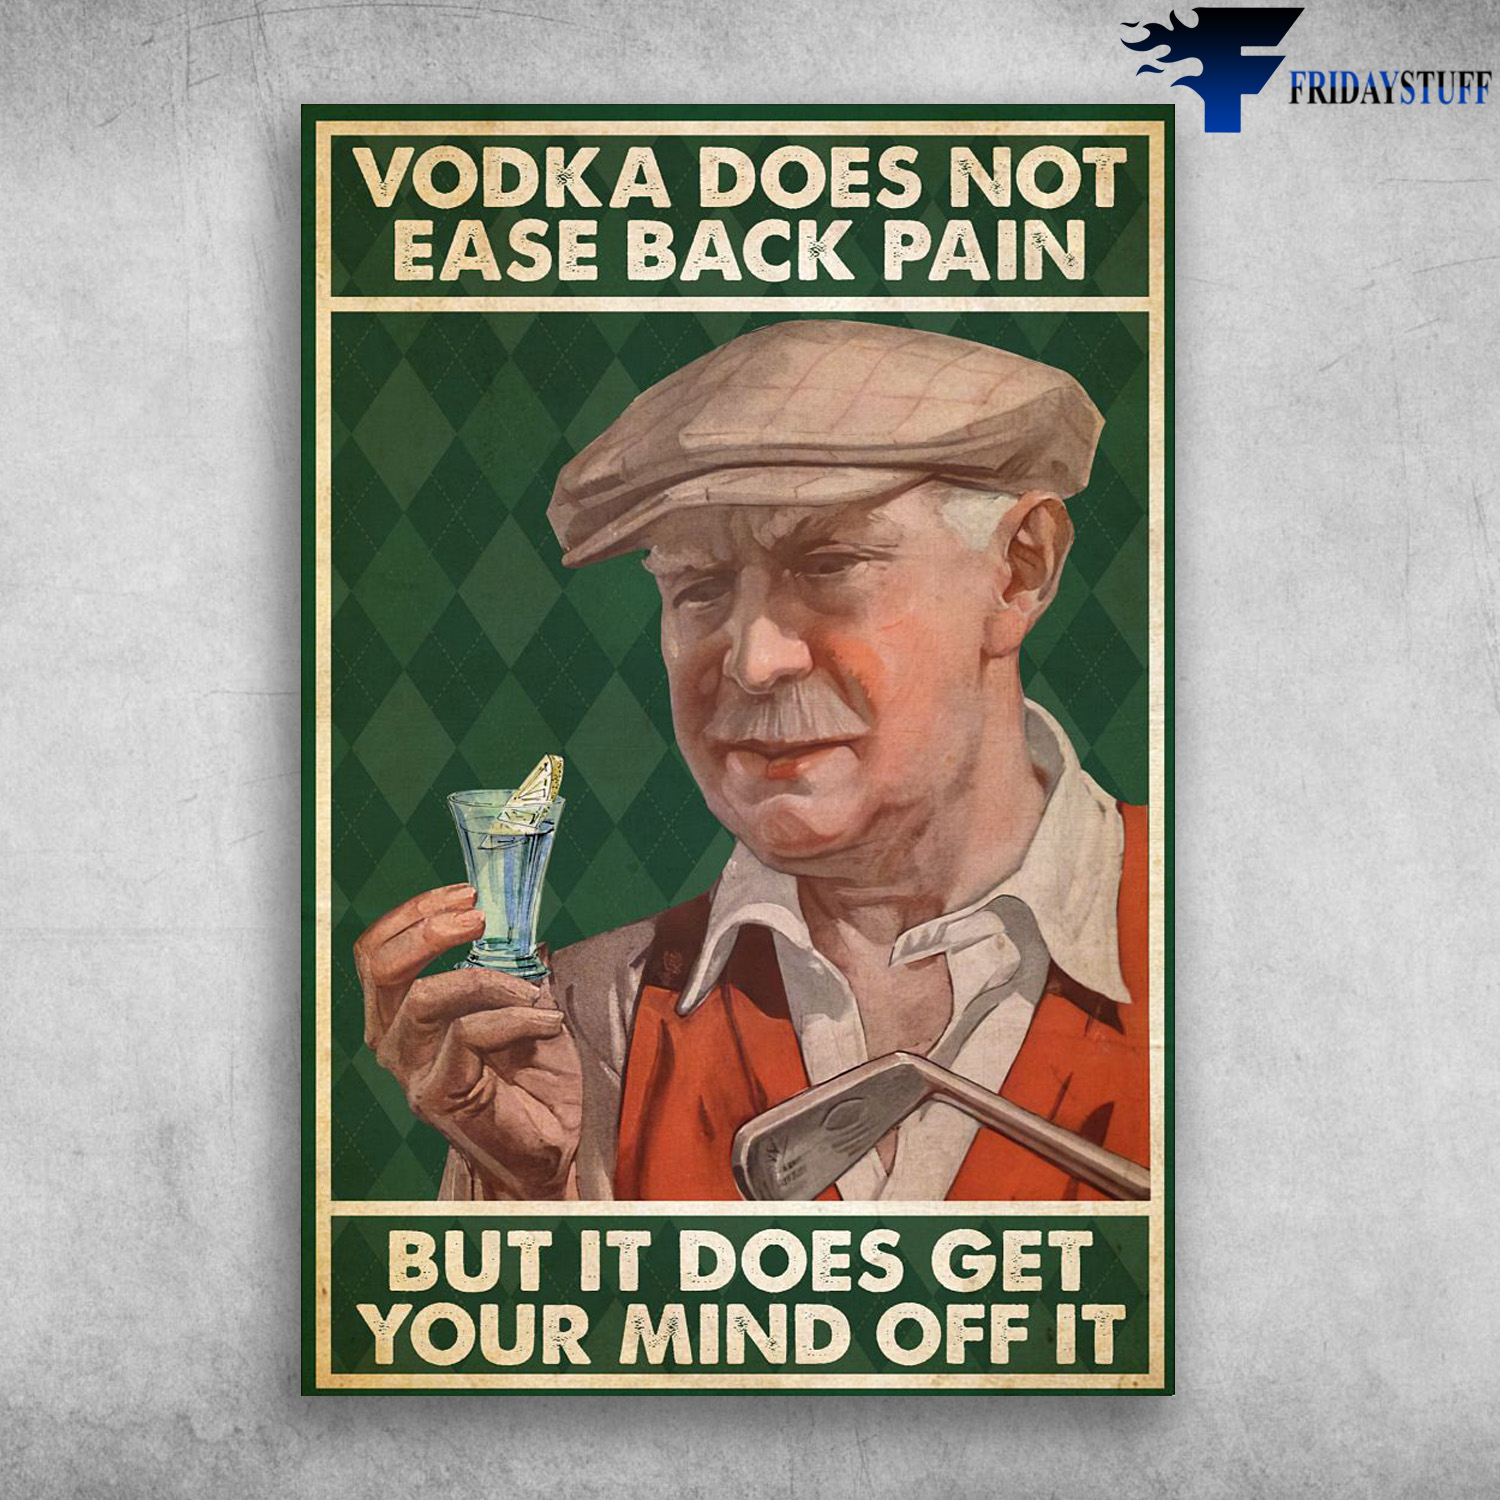 Old Man Plays Golf, Wine - Vodka Does Not Ease Back Pain, But It Does Get Your Mind Off It